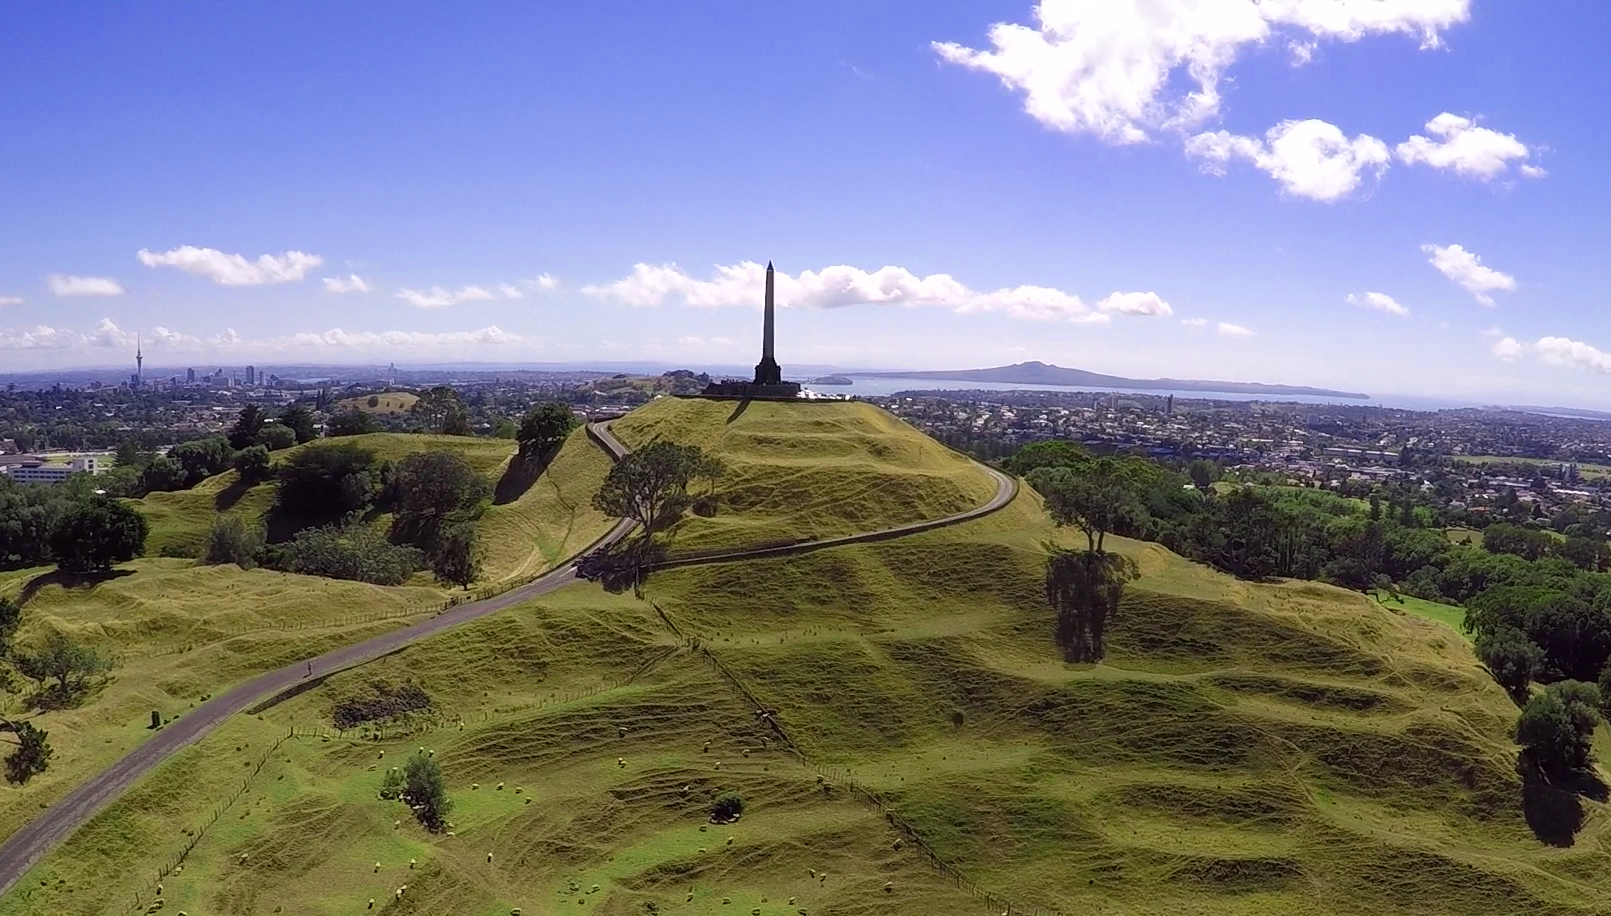 One_Tree_Hill_Auckland_March_2015.jpg